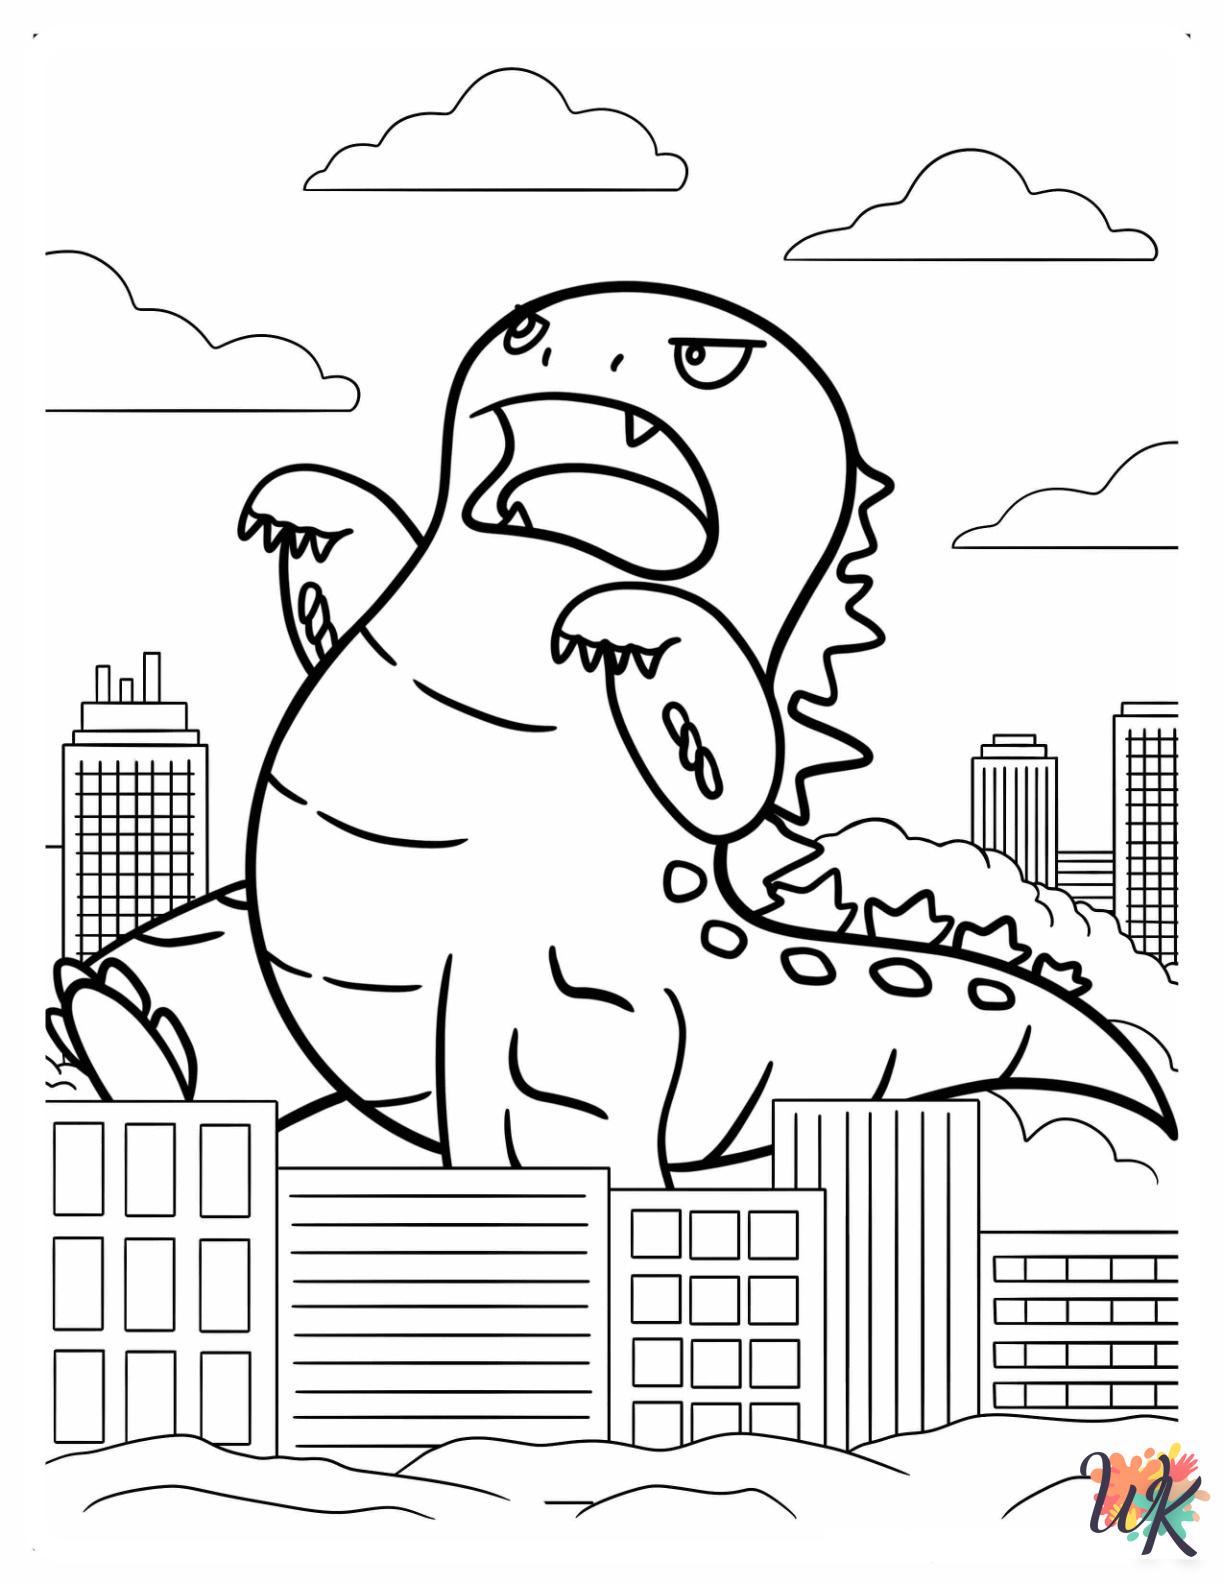 Godzilla coloring pages for kids